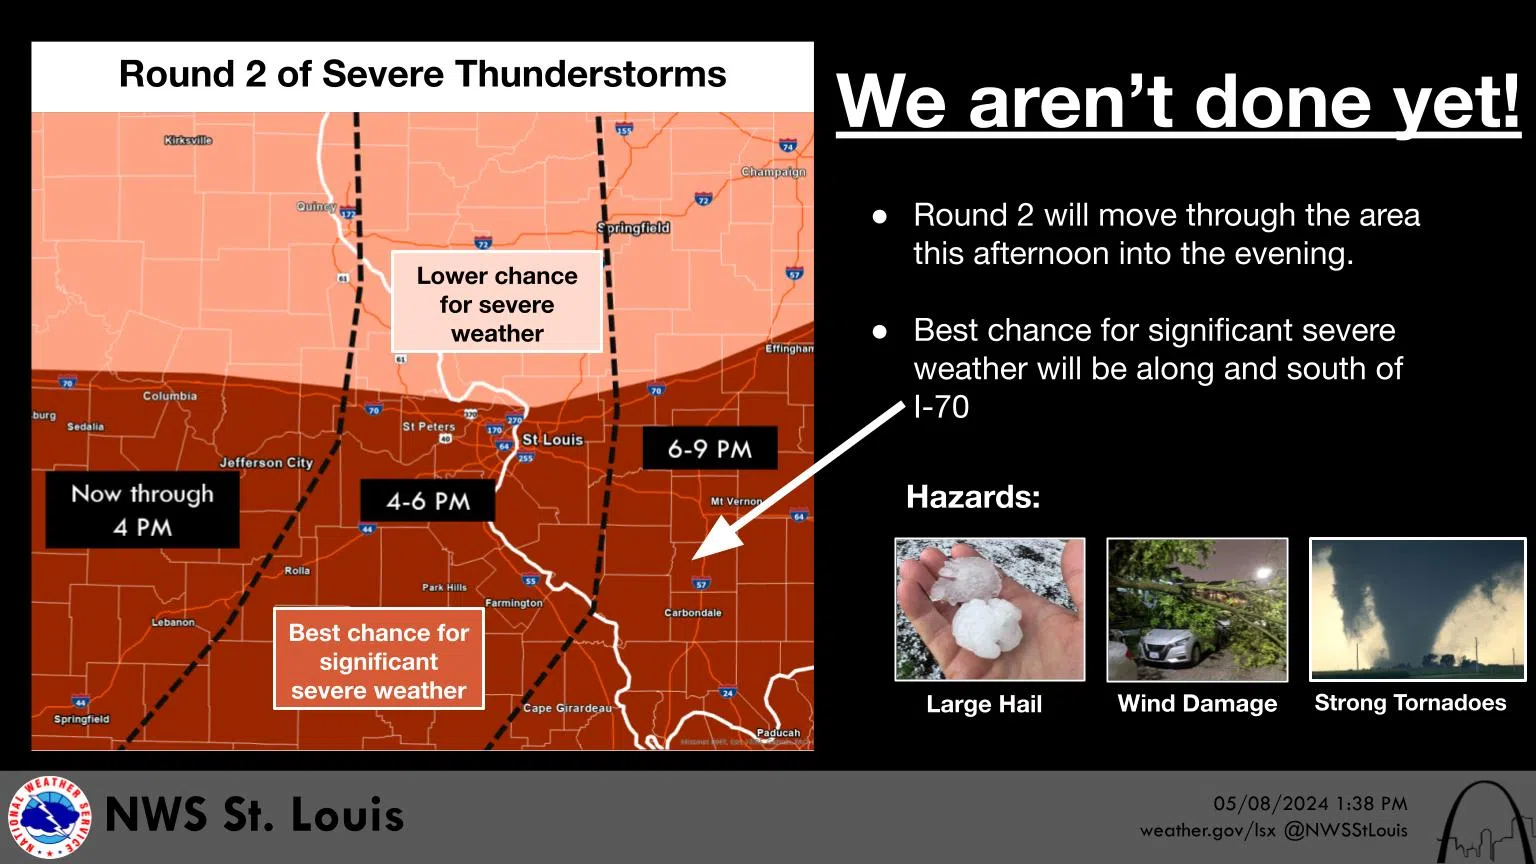 NWS says 2nd Round of Severe Storms possible this evening/tonight